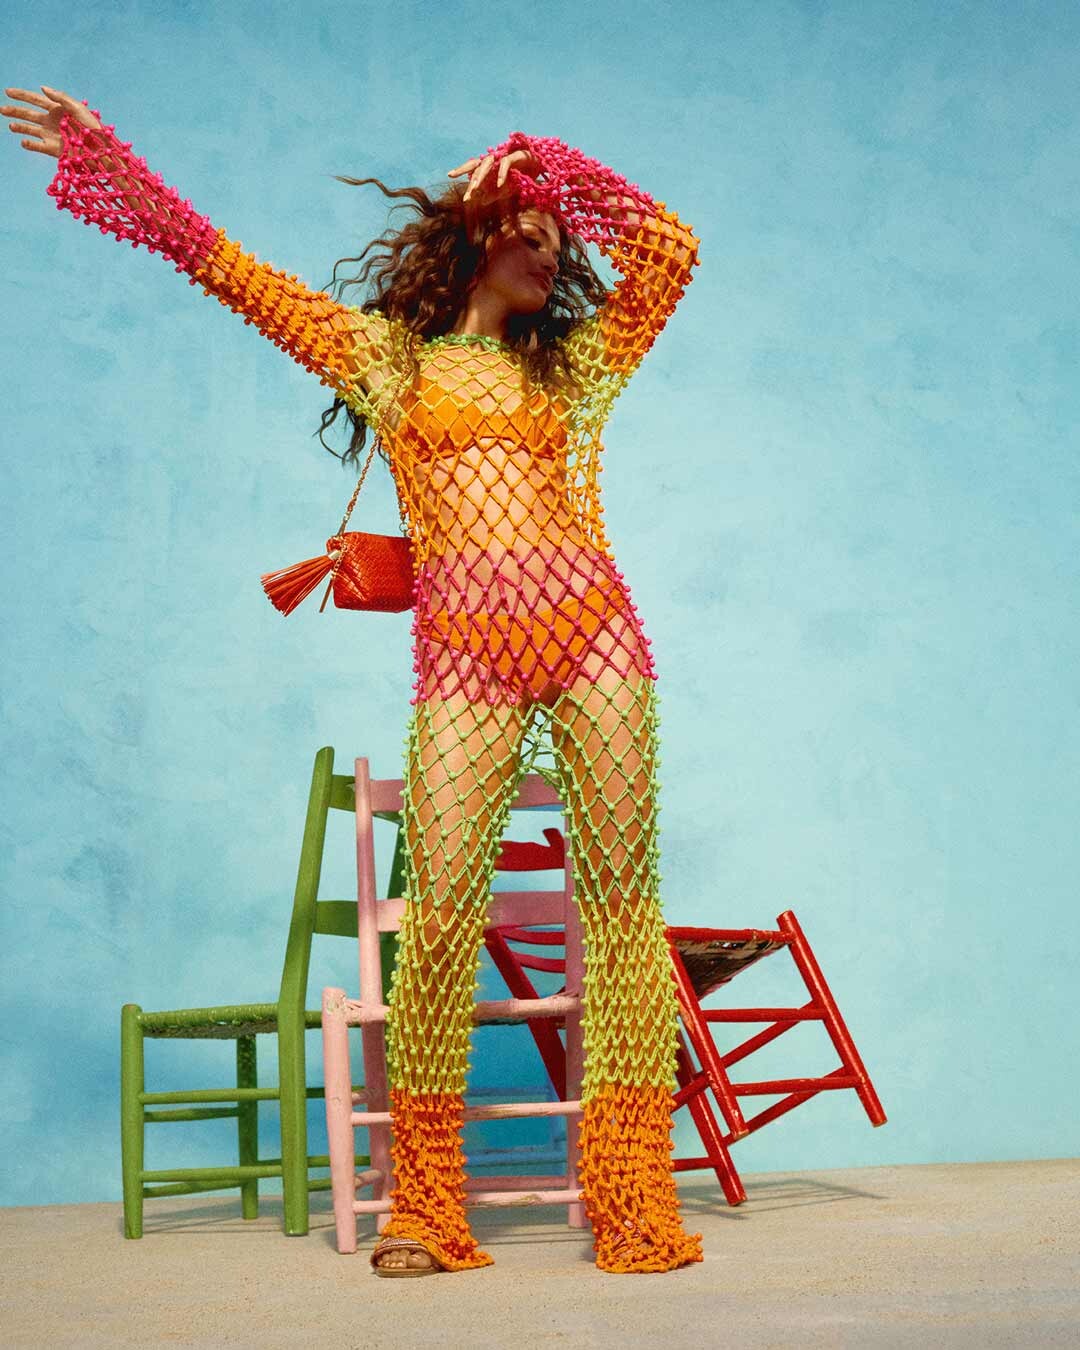 curly-haired girl dancing with her hands in the air wearing a colorful outfit and flat sandals next to 3 chairs and a blue wall